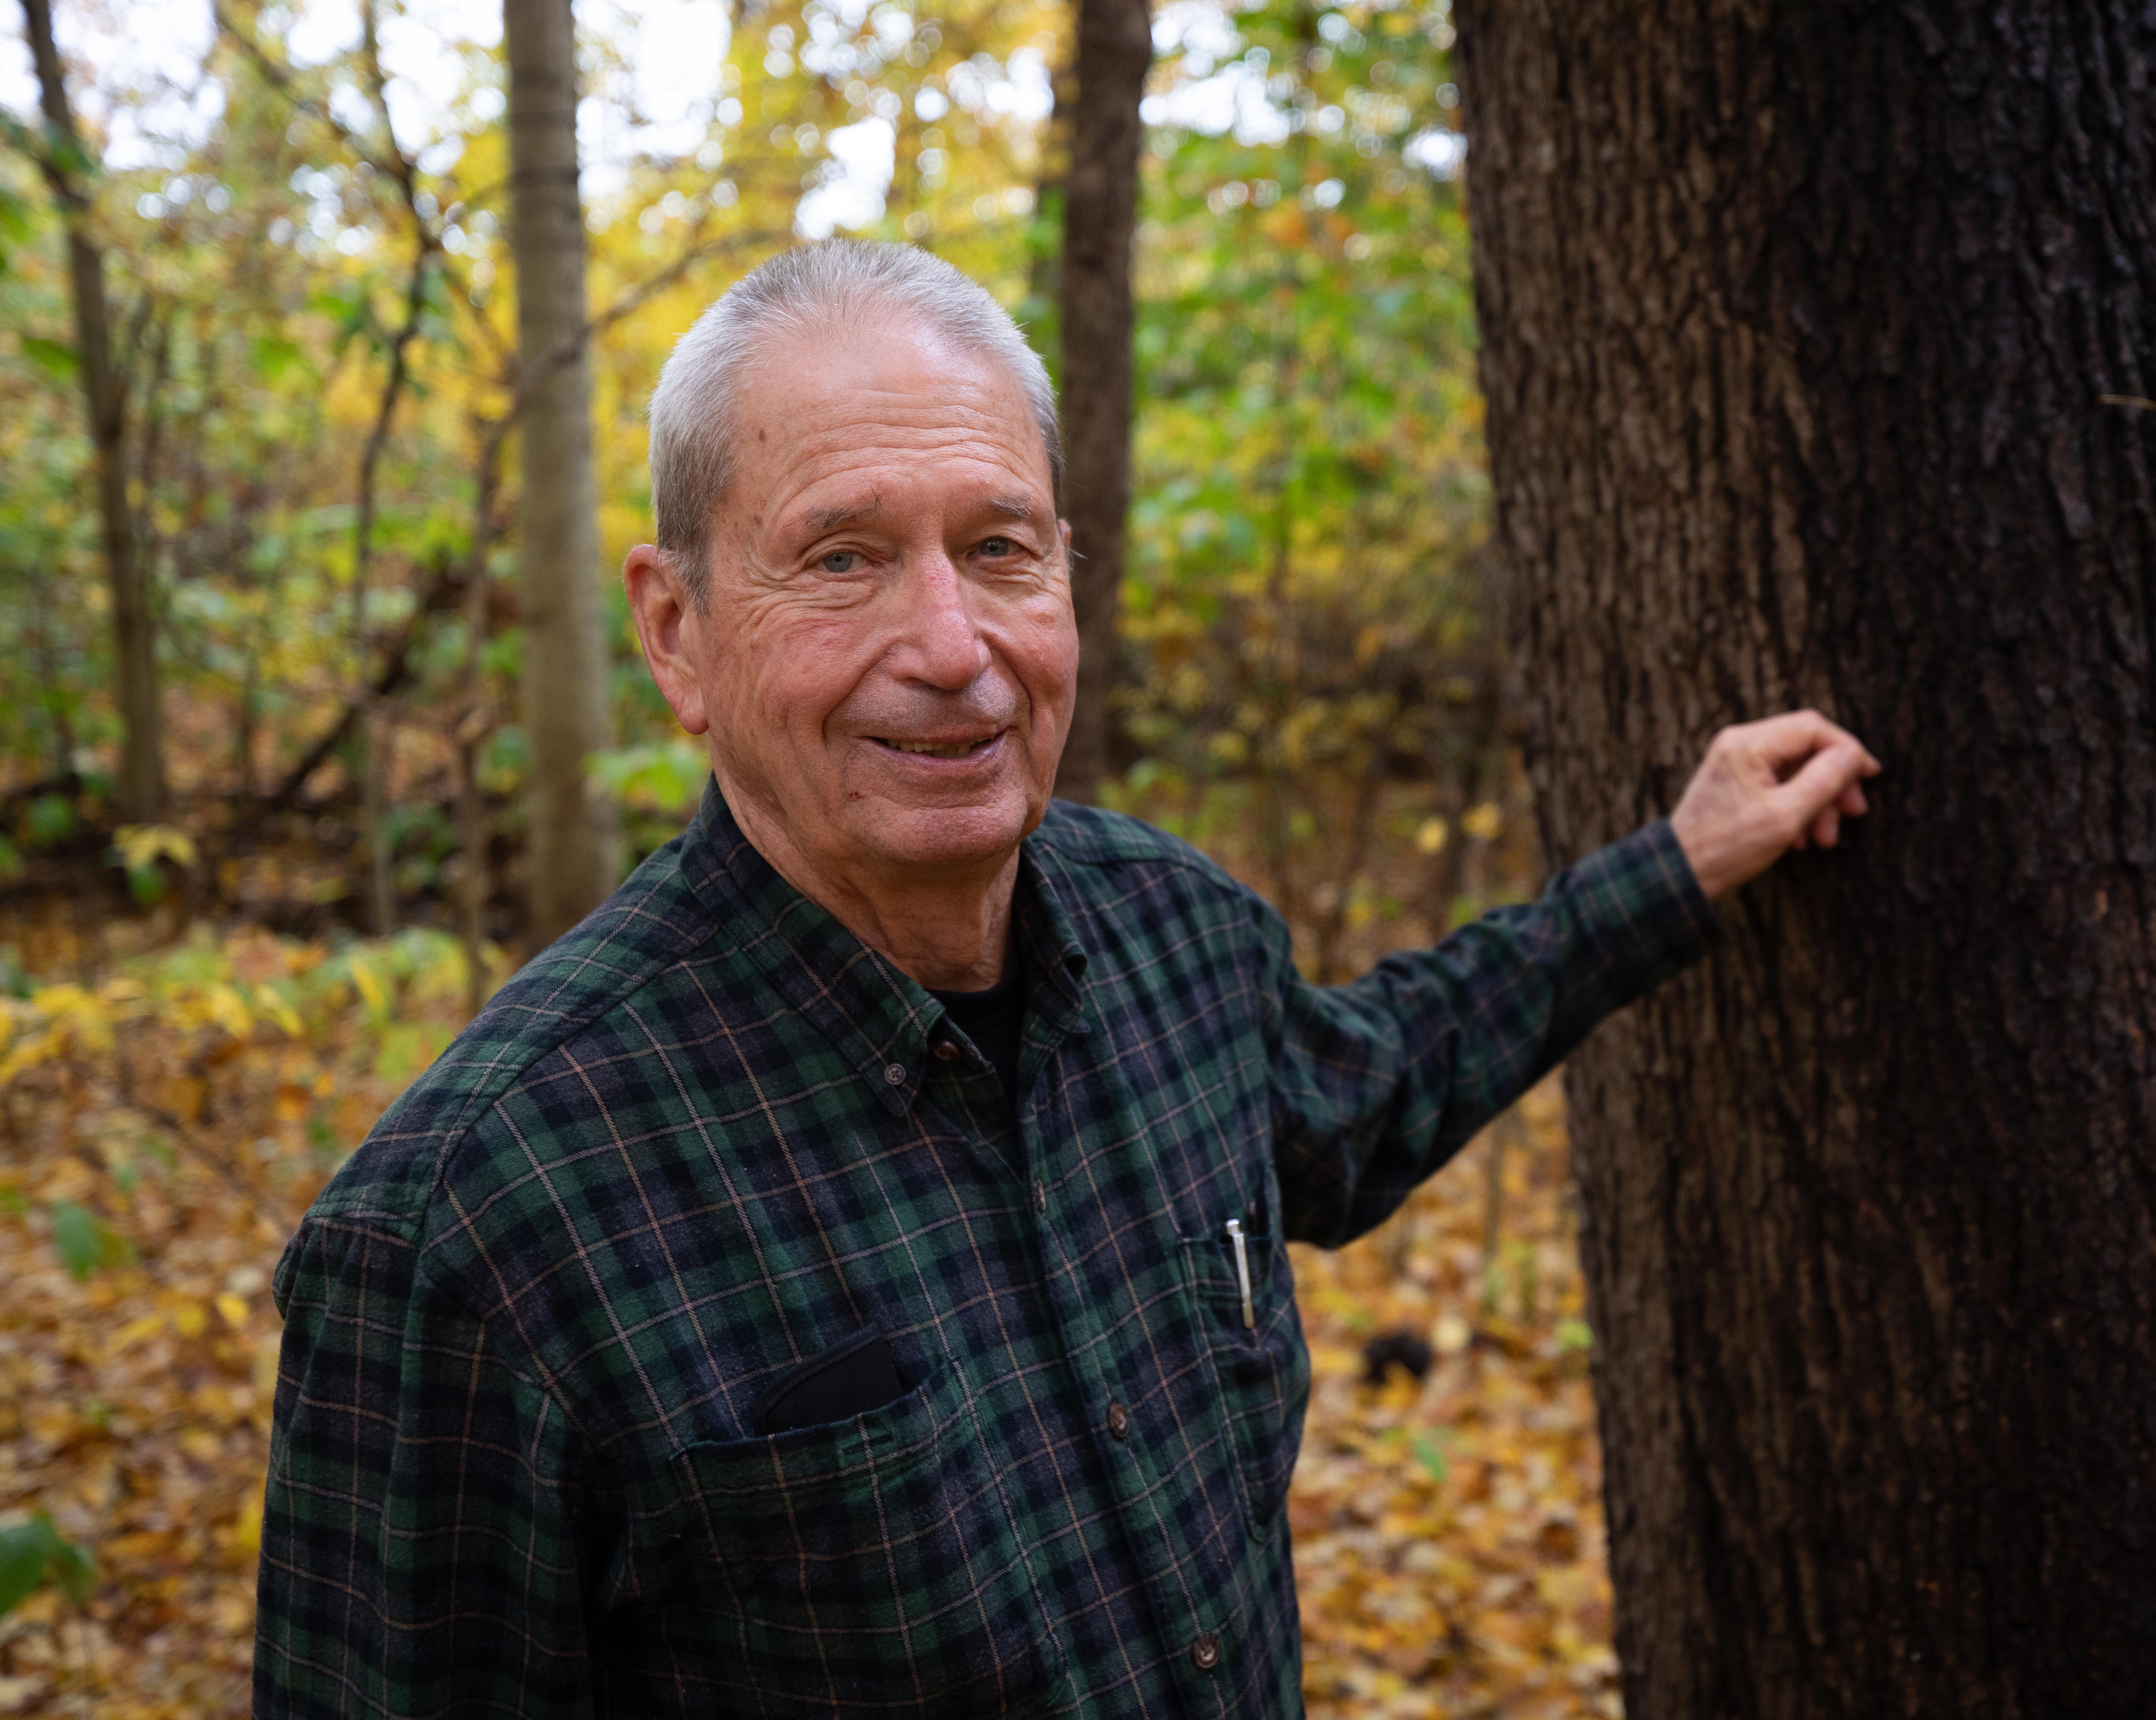 Landowner Charlie Hetrick stands next to a tree on his wooded property.